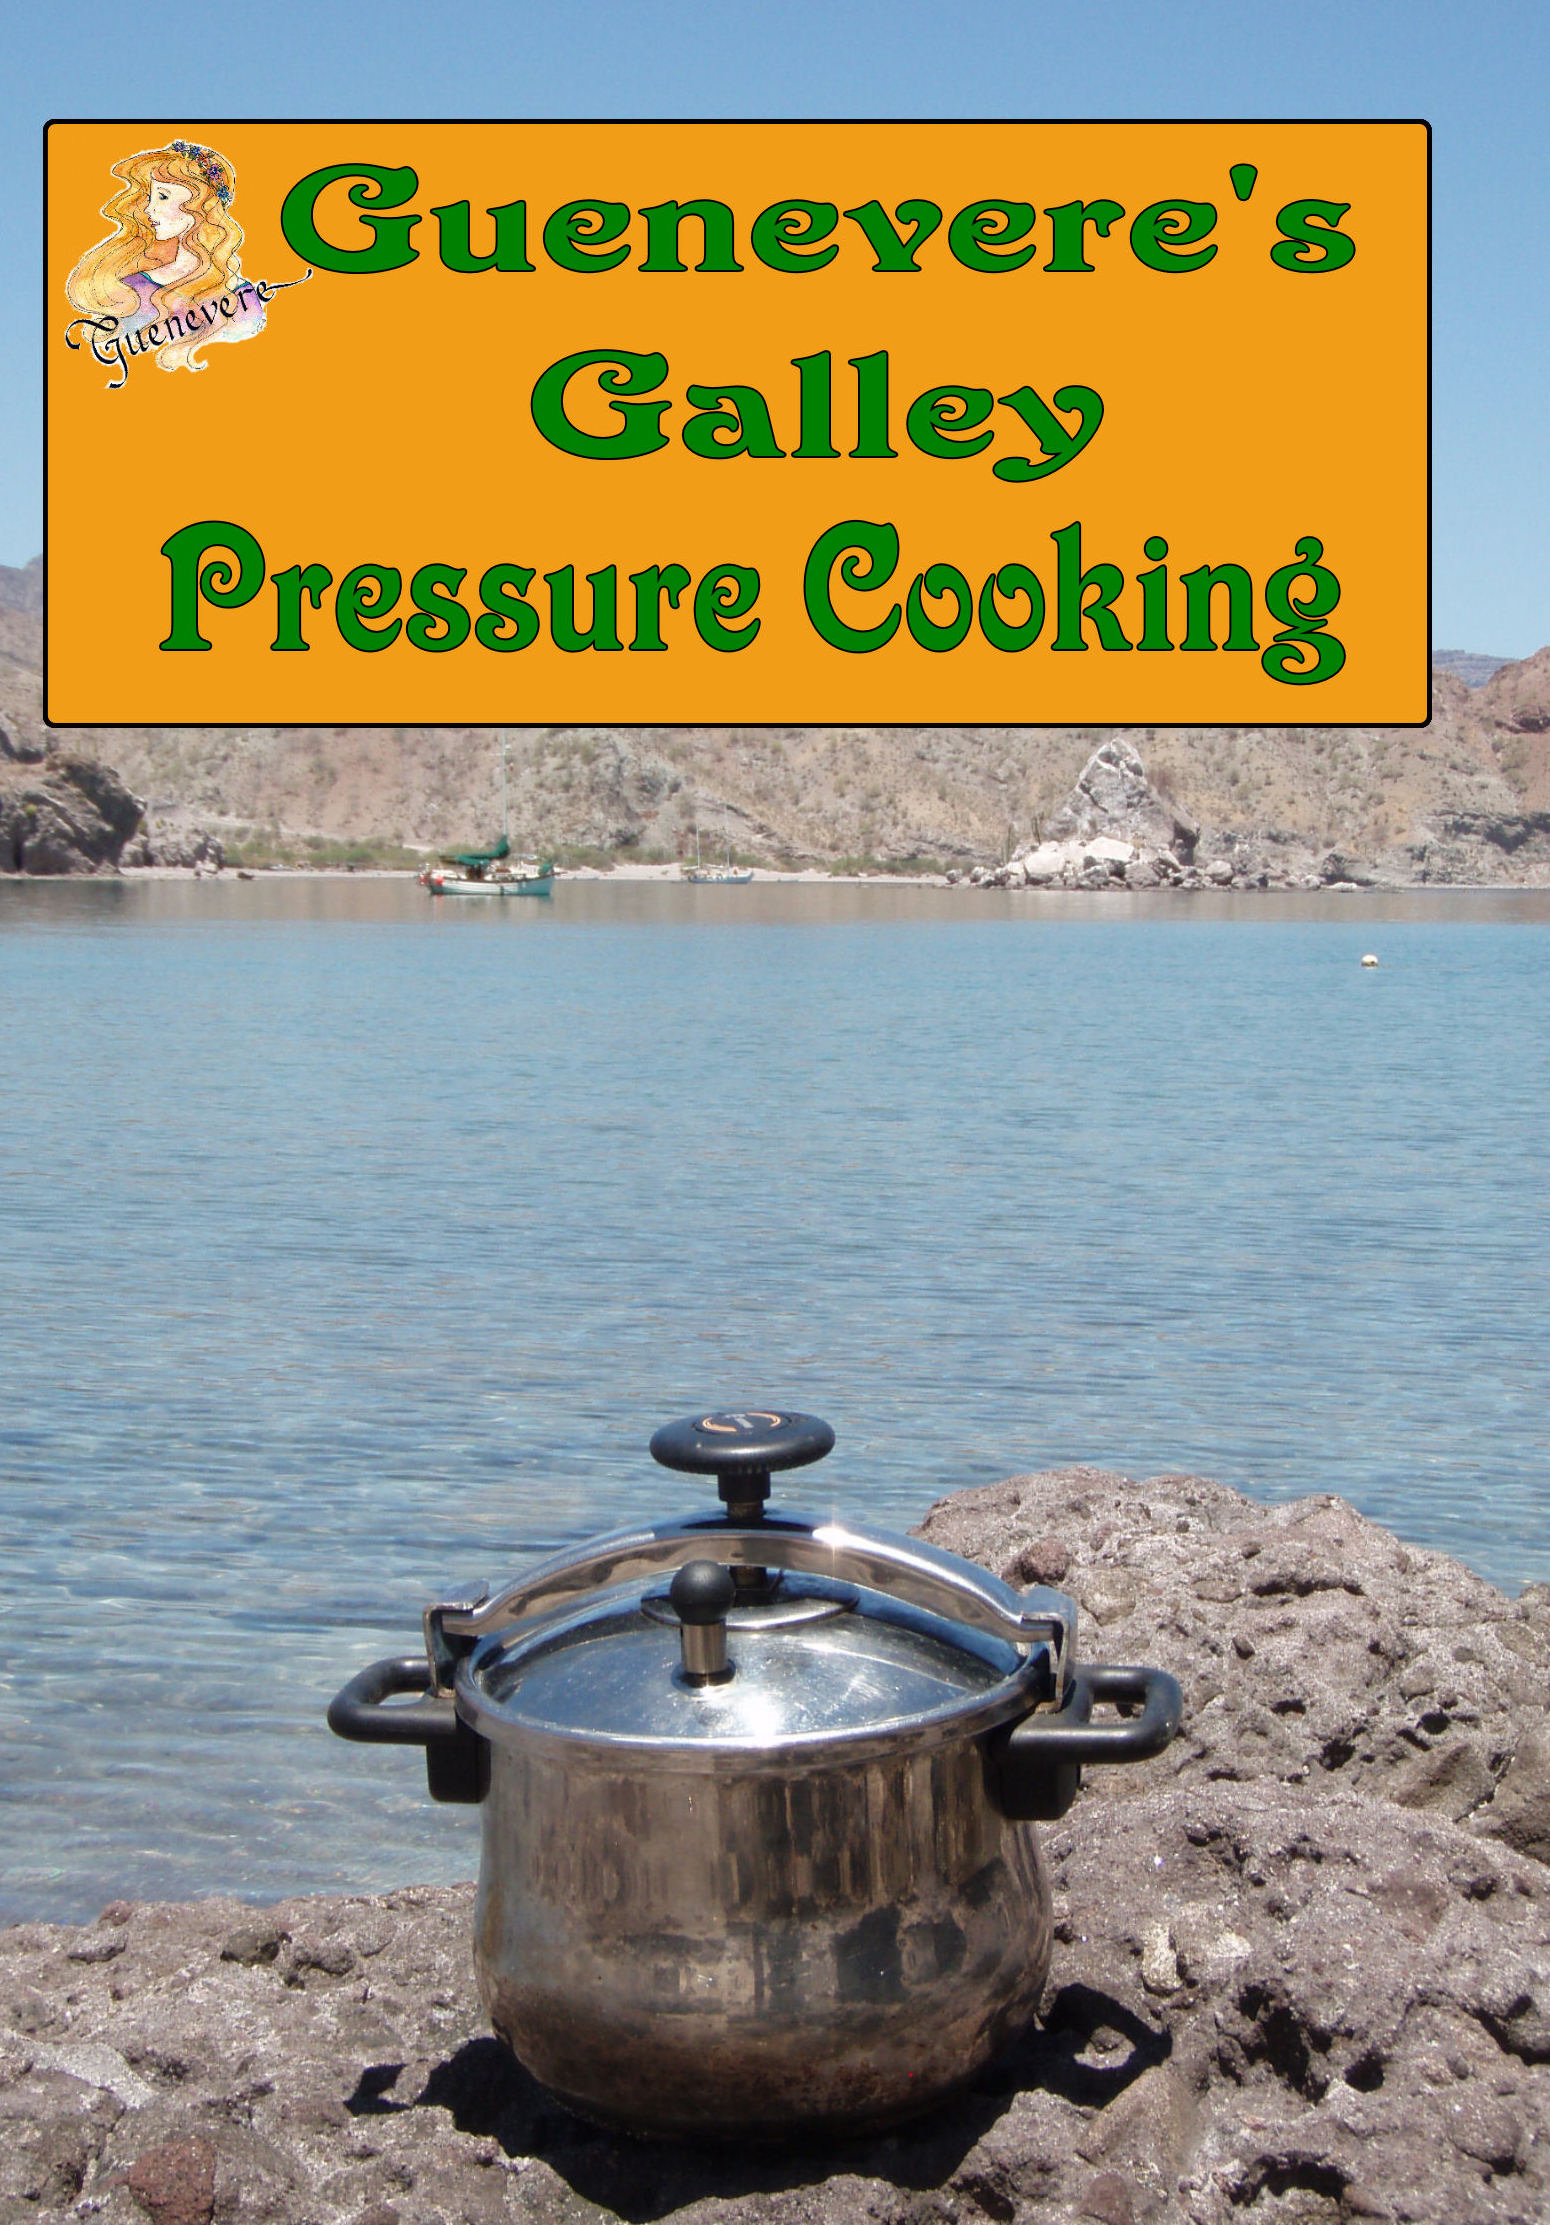 Guenevere's Galley Pressure Cooking